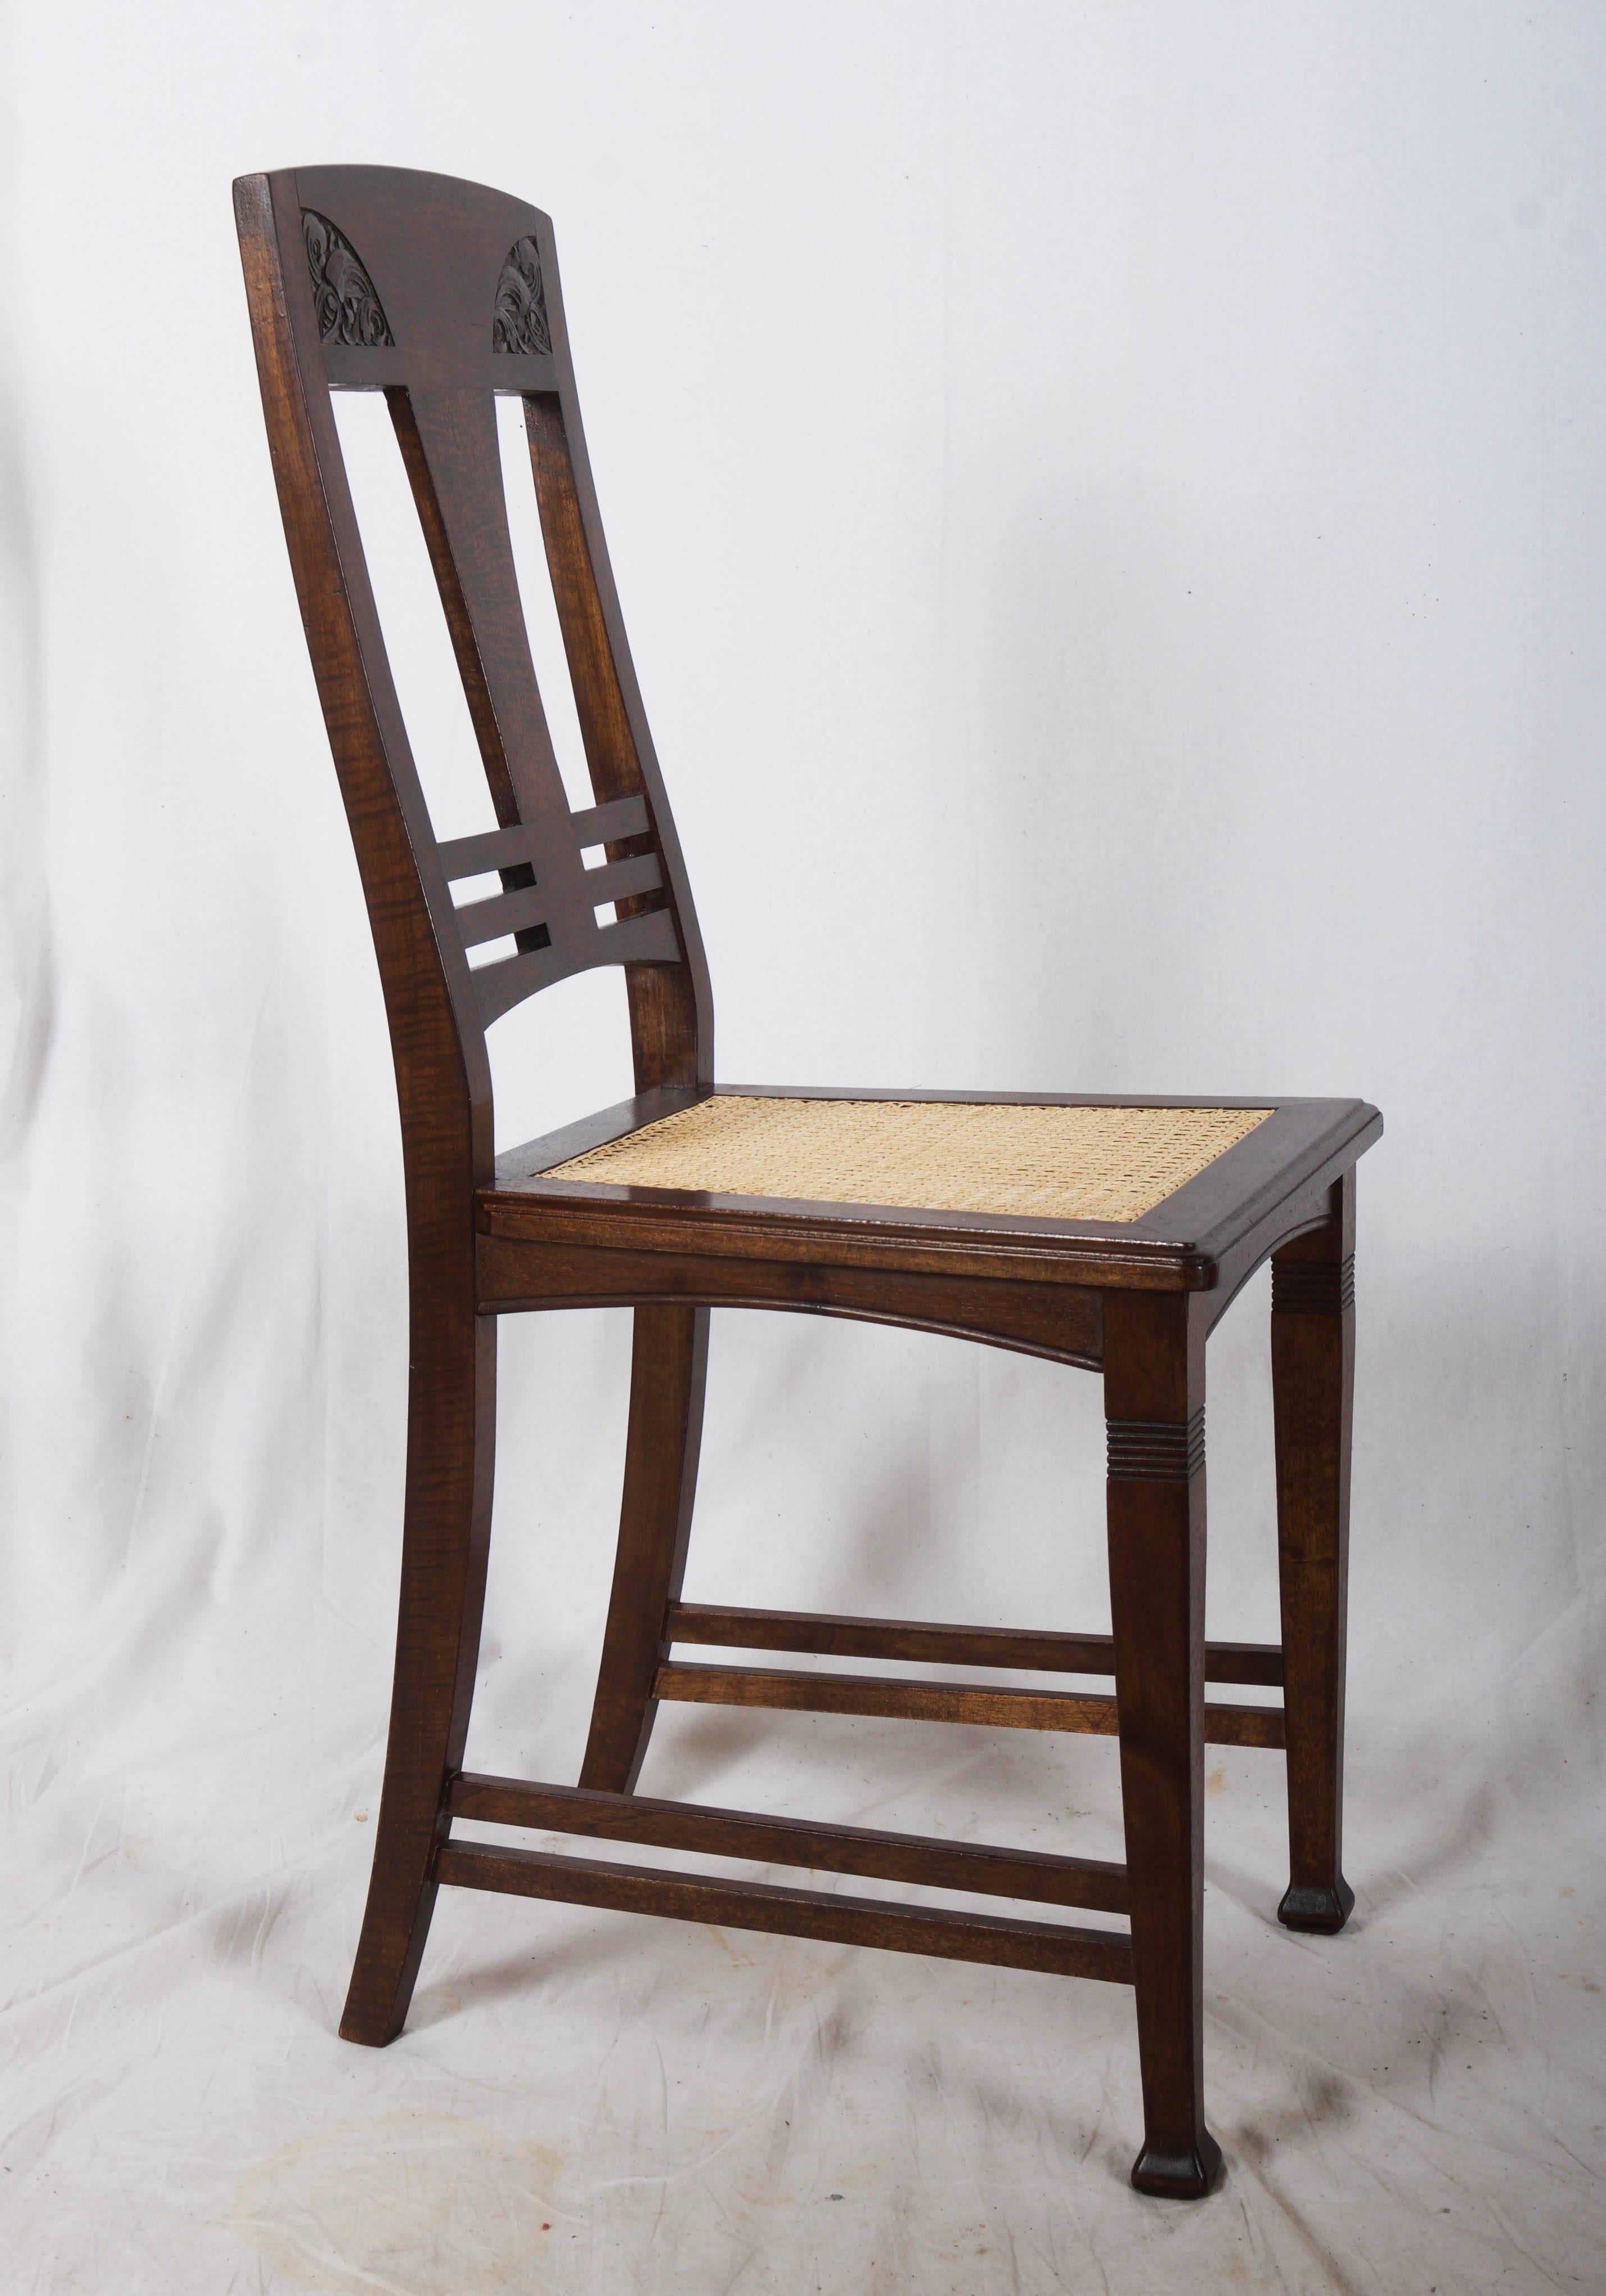 Nut wood construction with a canned seat. Made in Germany between 1900-1910
Four pieces available, delivery time 2-3 weeks.